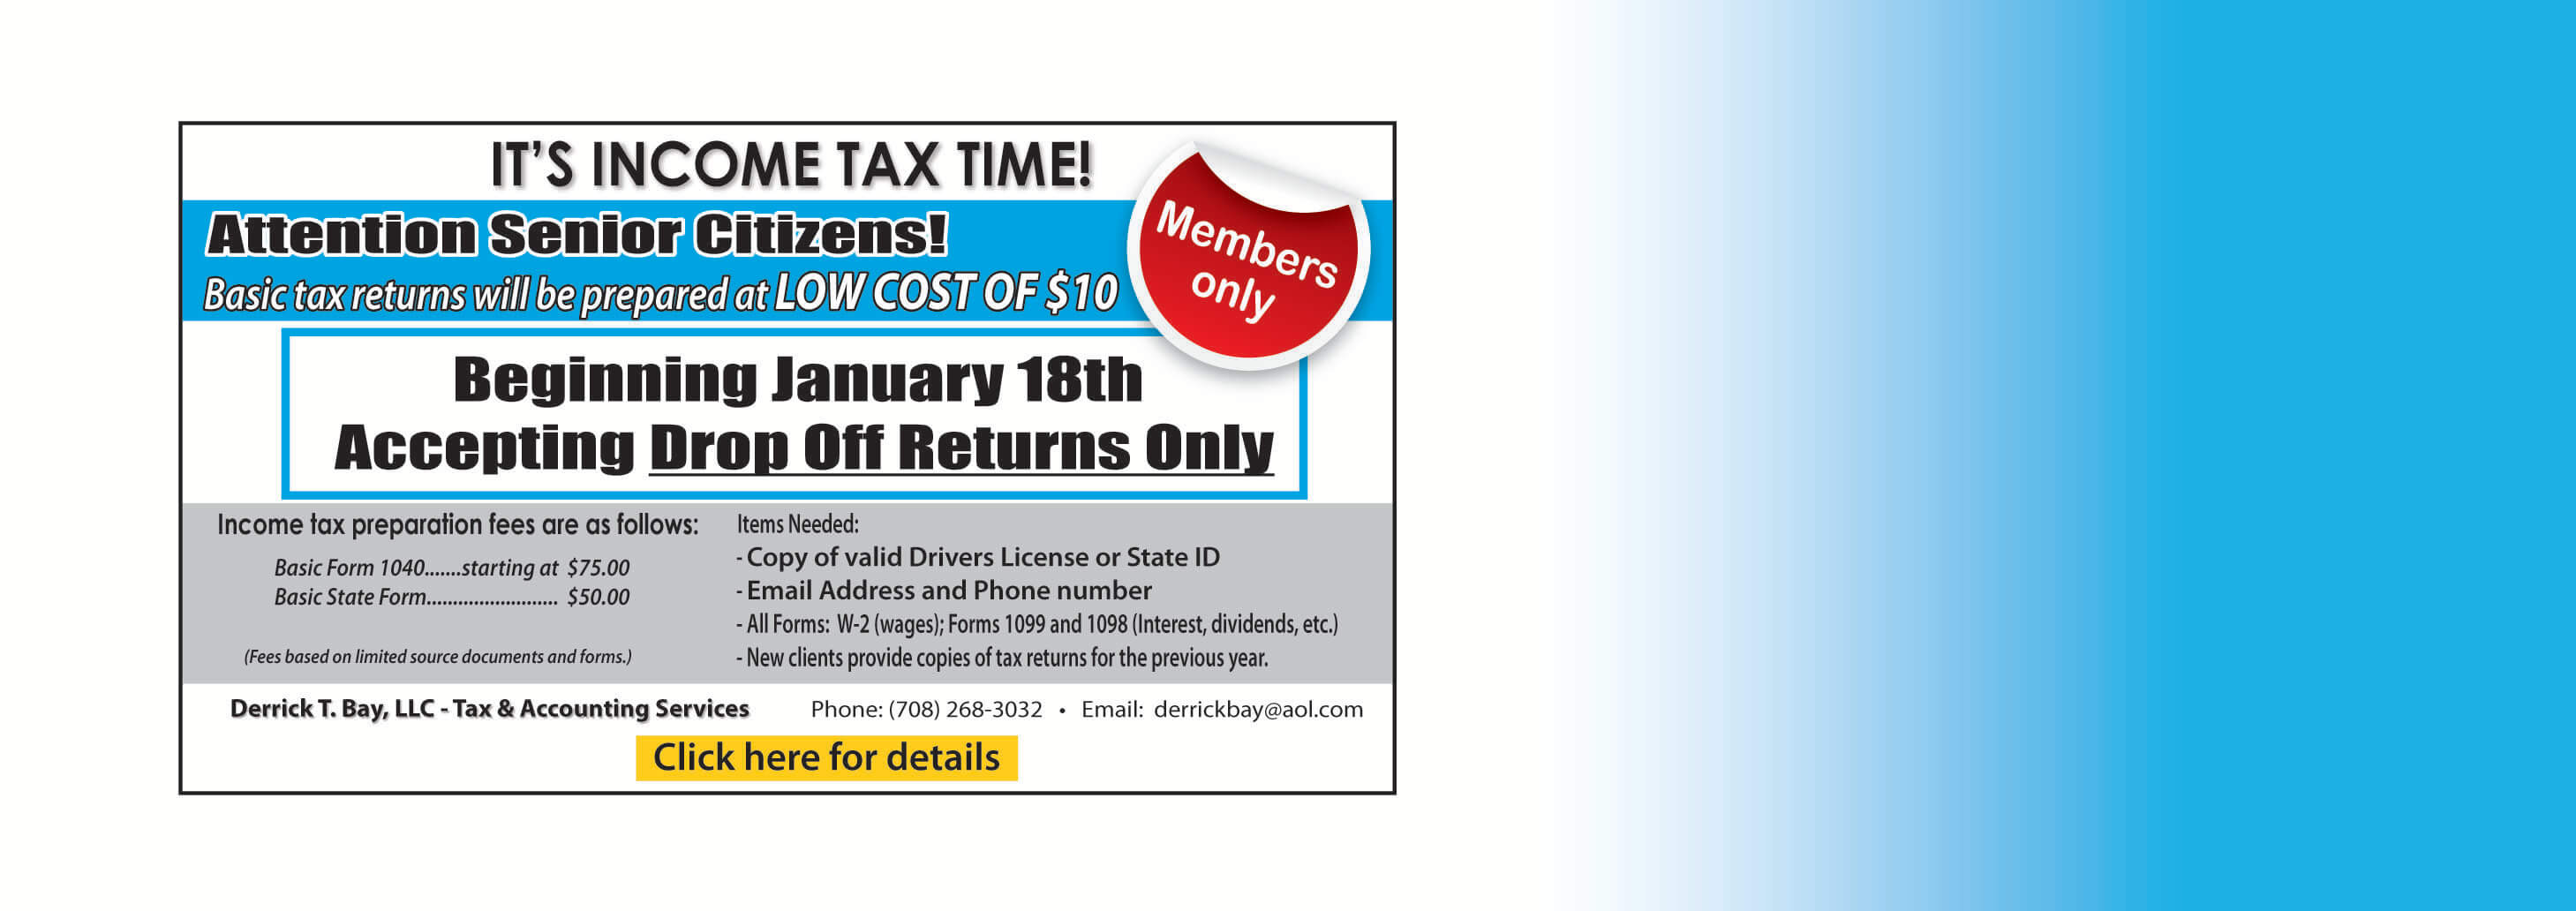 It's Income Tax Time, Members Only, Drop off Returns Only